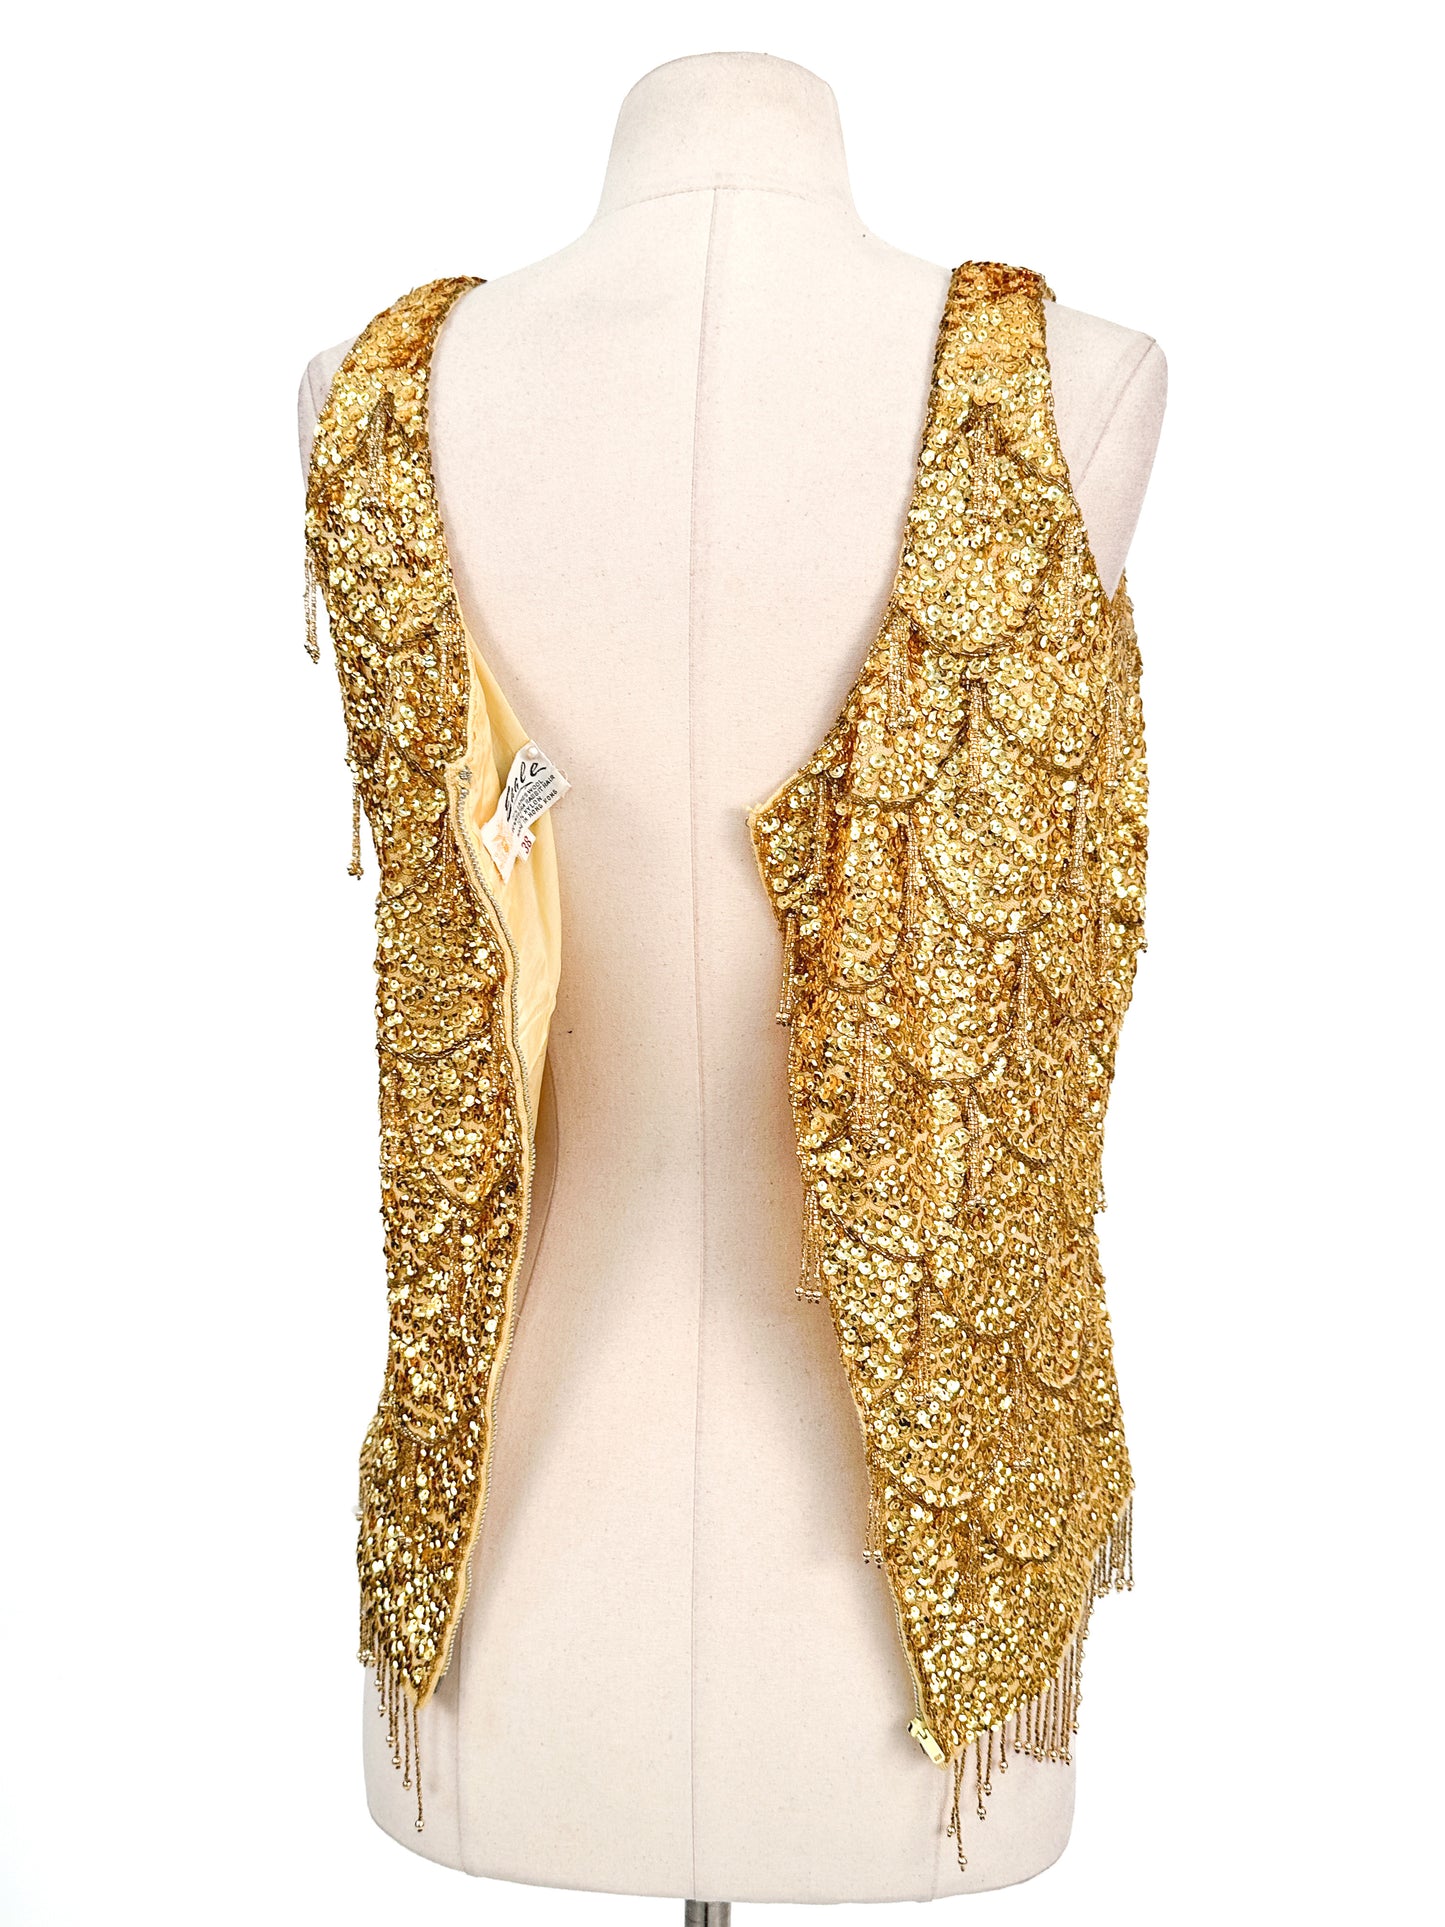 1960s Gold Sequin Top with Tassels / Bust 28